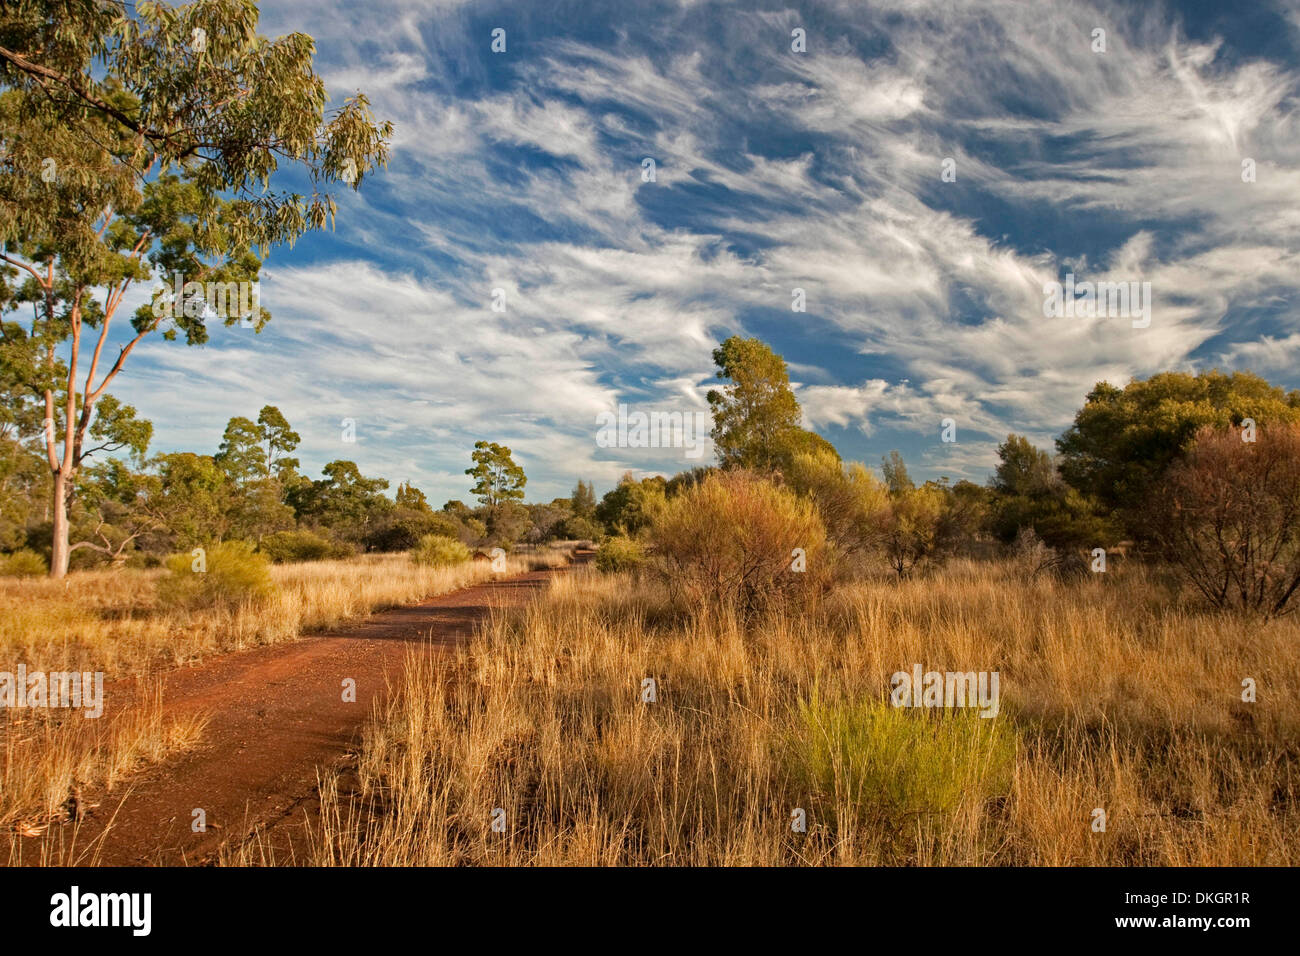 Bush track through grasslands of outback Australia with golden grasses, tall trees and blue sky near Glenmorgan in Queensland Stock Photo